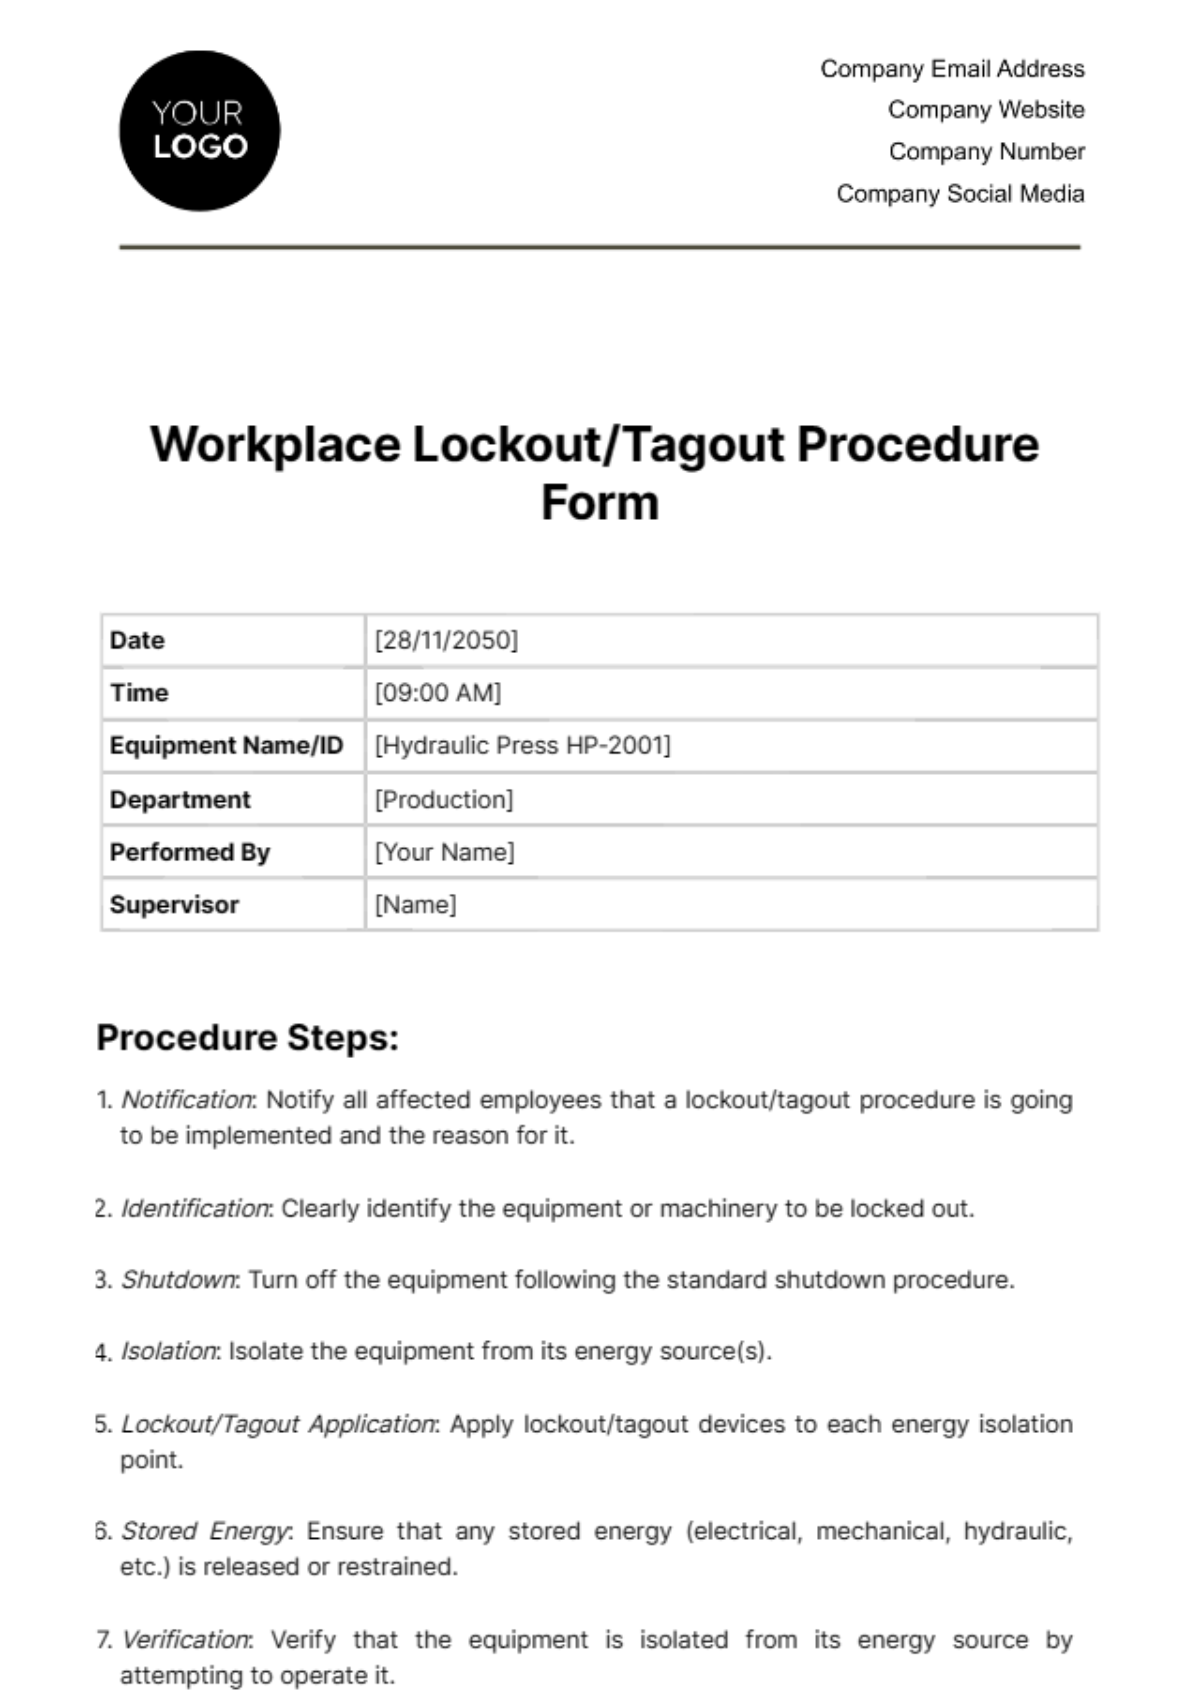 Workplace Lockout/Tagout Procedure Form Template